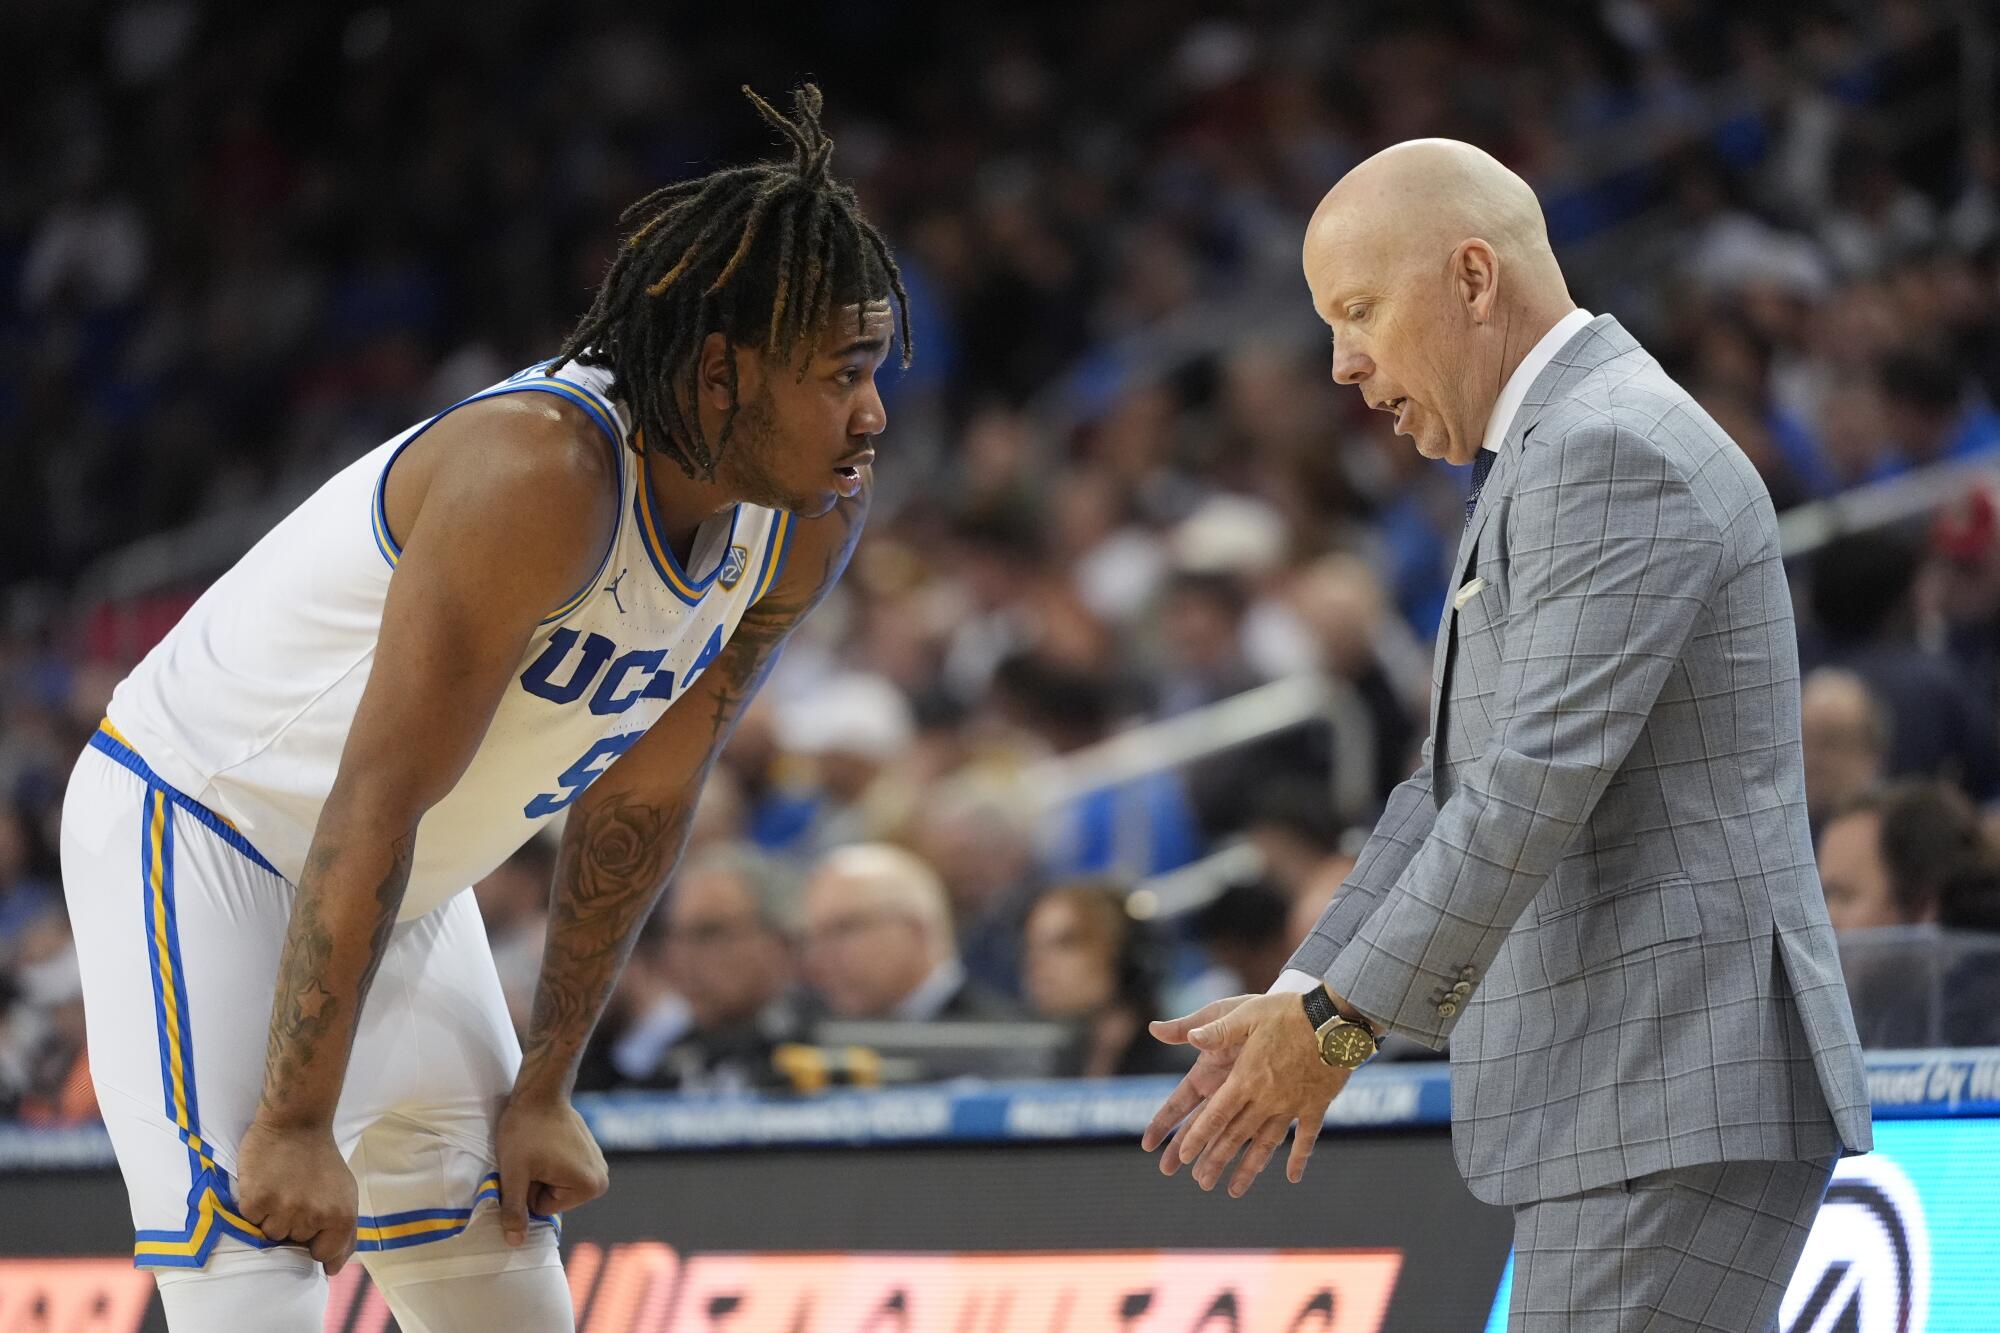 Brandon Williams talks to UCLA coach Mick Cronin during a game against Arizona at Pauley Pavilion in March.